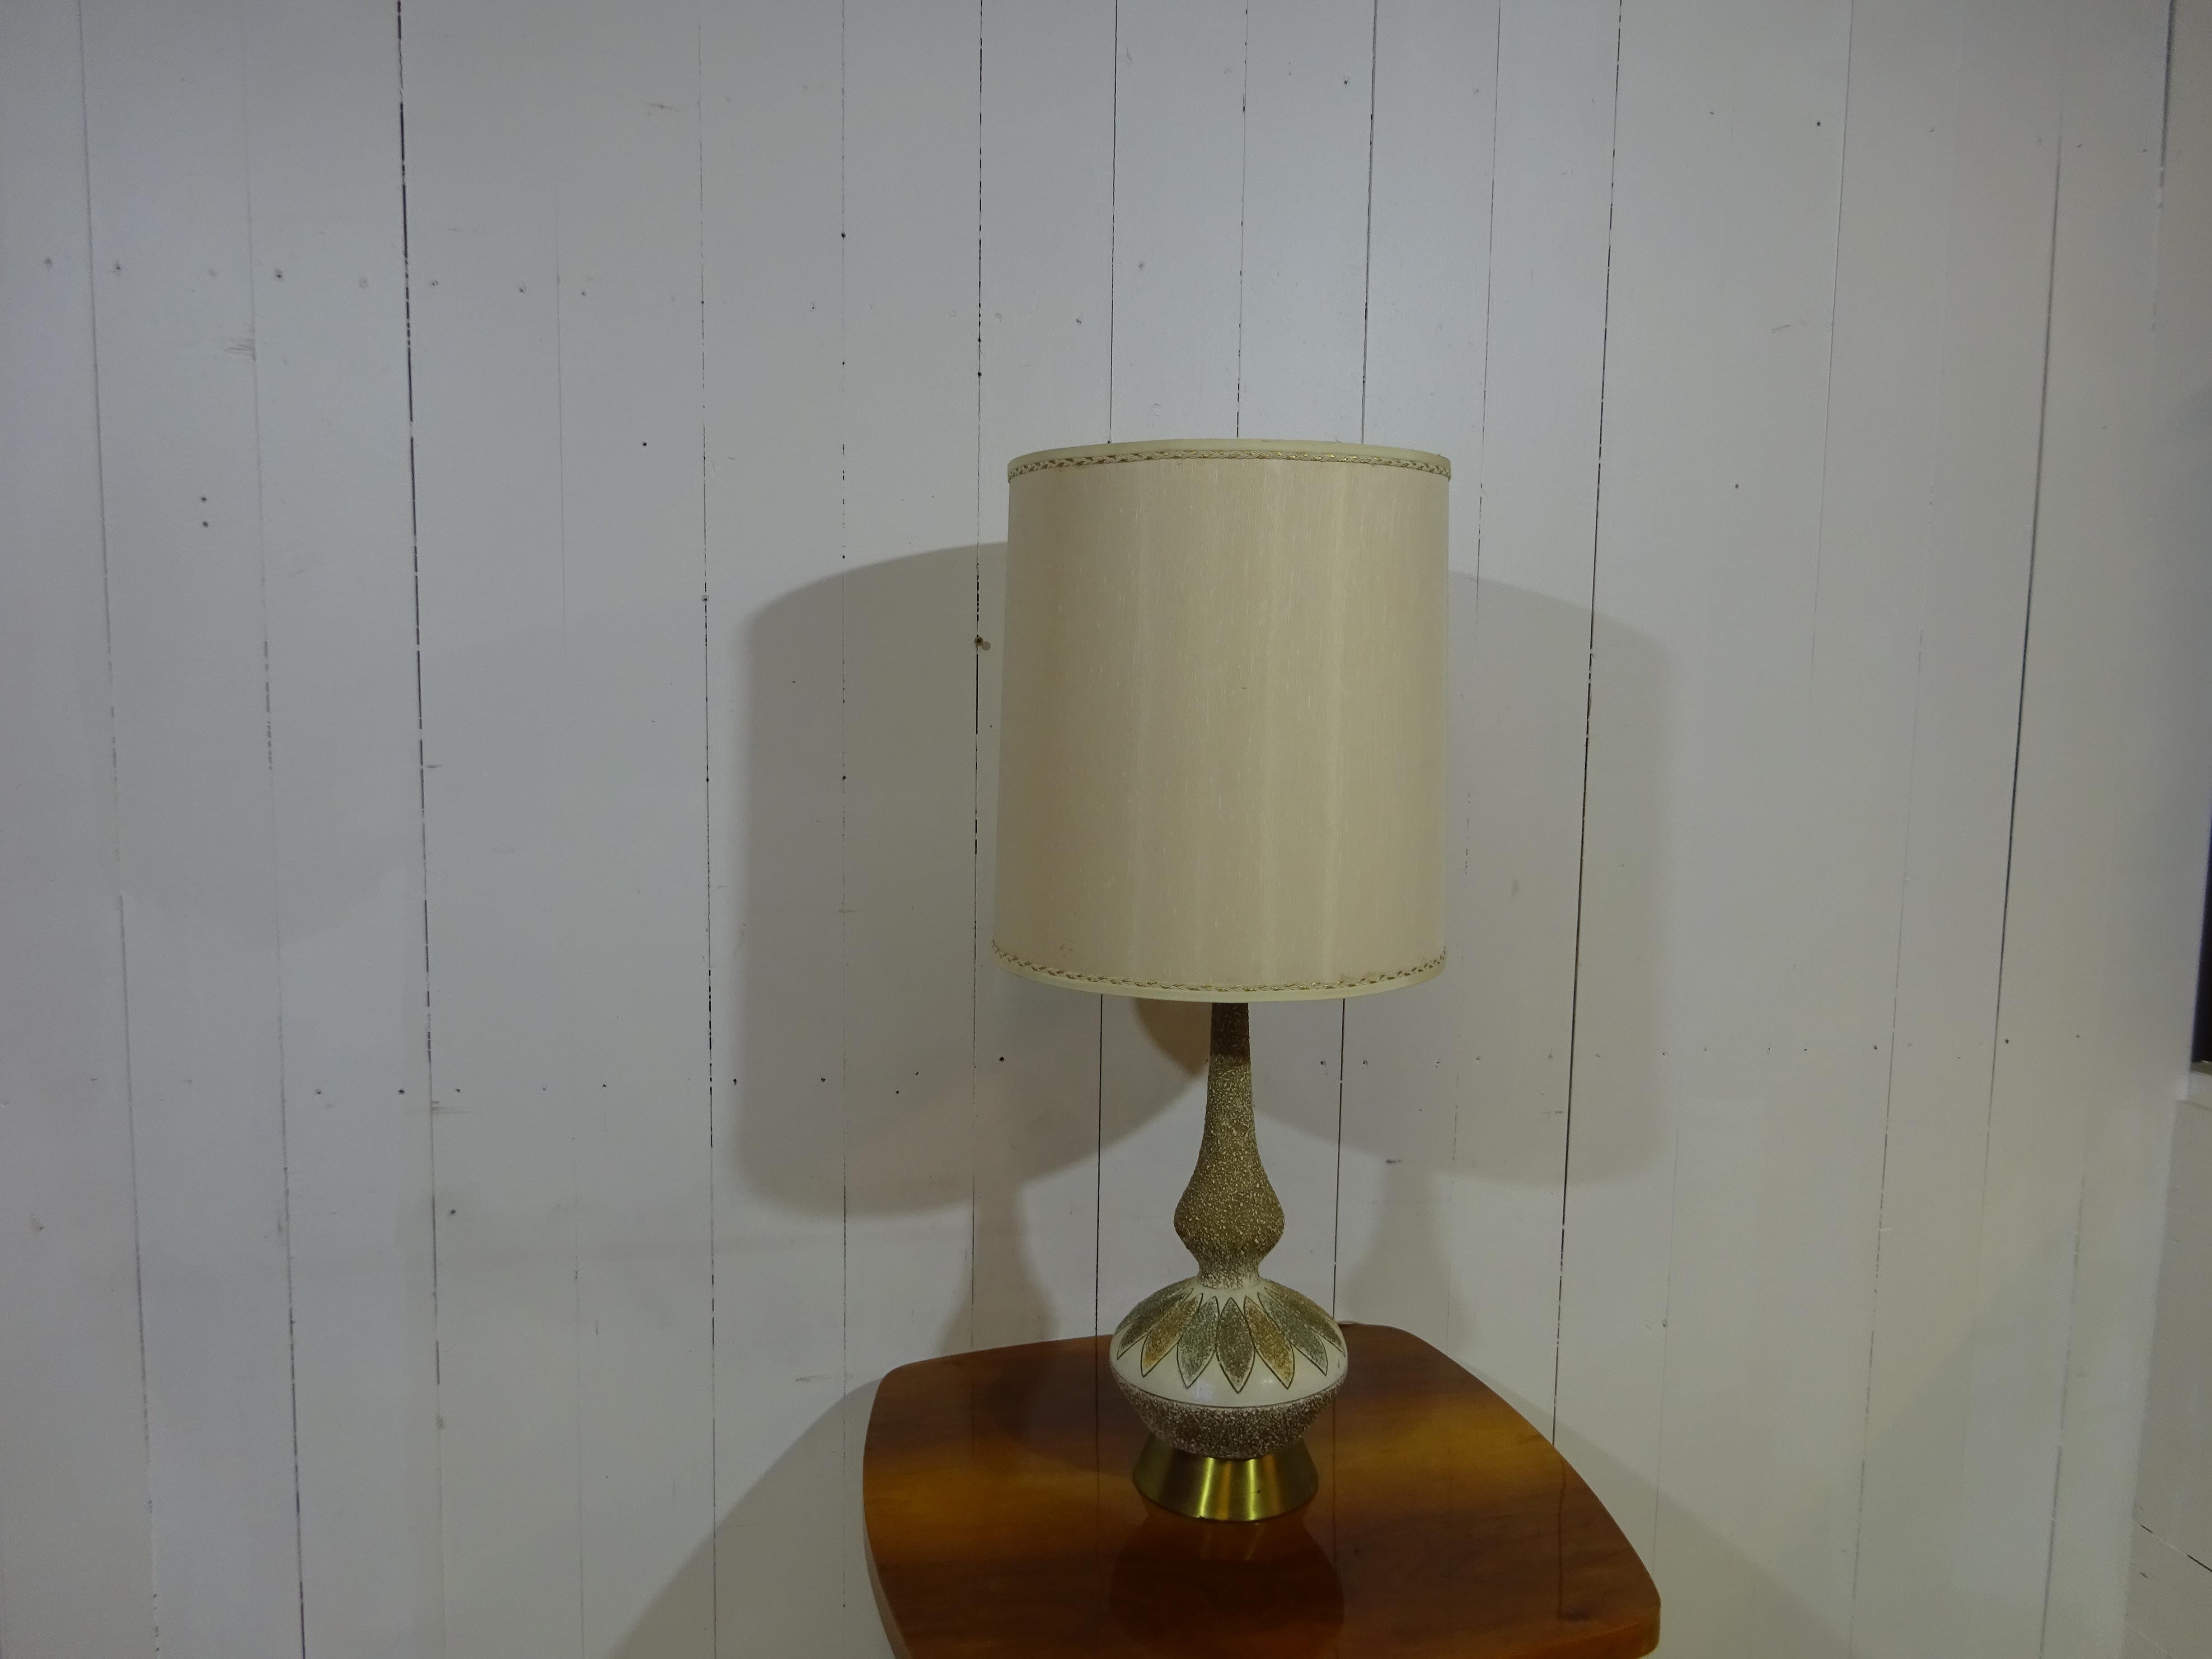 effect applied and then a stunning flower shape created with a selection of subtle colours. 
Above is a lamp holder supporting the original large lamp shade. Rewired and fitted with a vintage style bulb for a gentle lighting effect. 

It is a